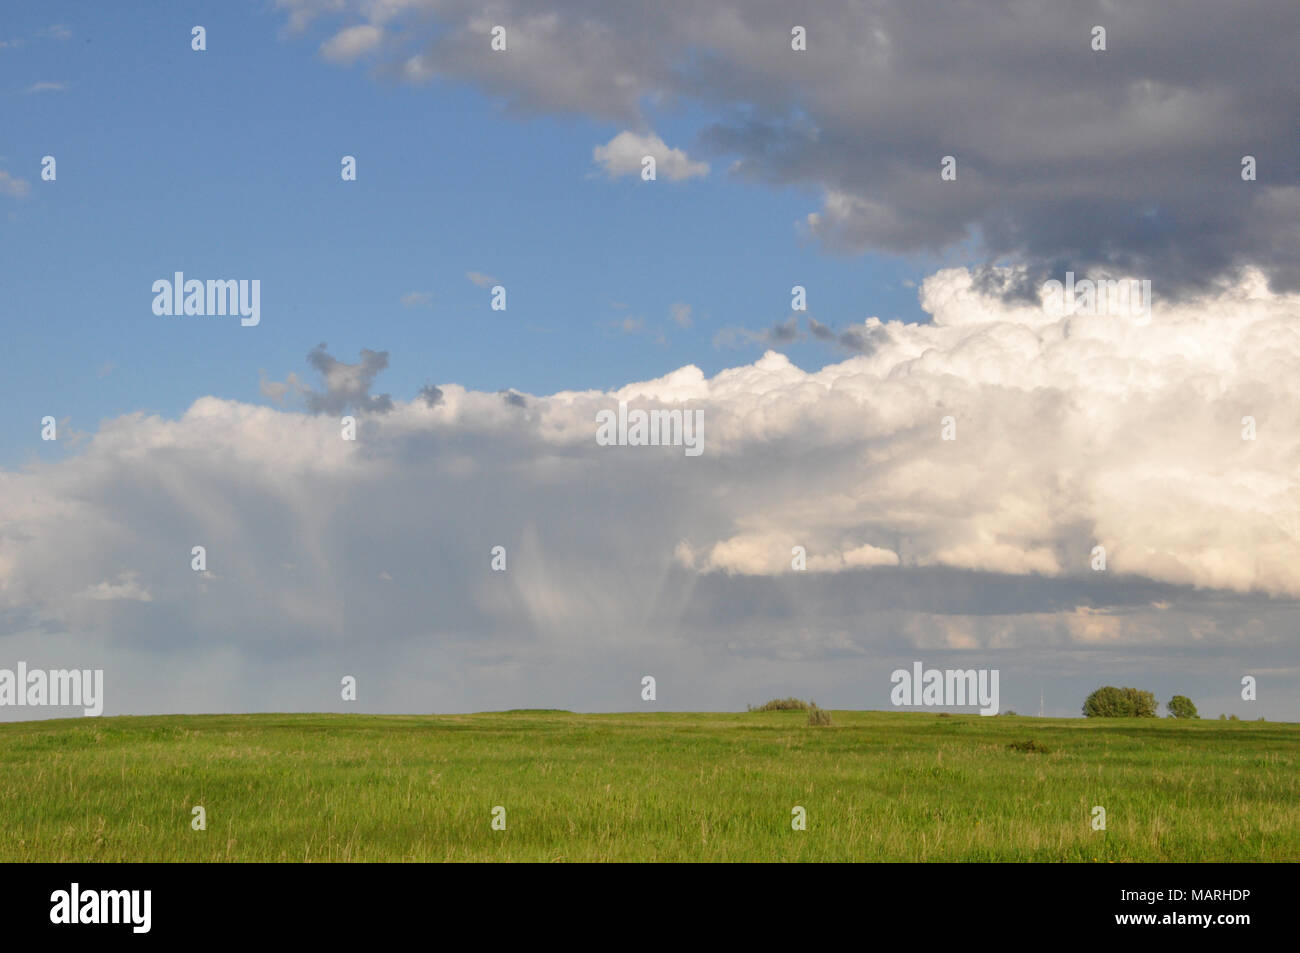 White Fluffy Cloud in a Bright Blue Sky over the Lush Green Grasses of Nose Hill Park in Calgary, Alberta. Stock Photo